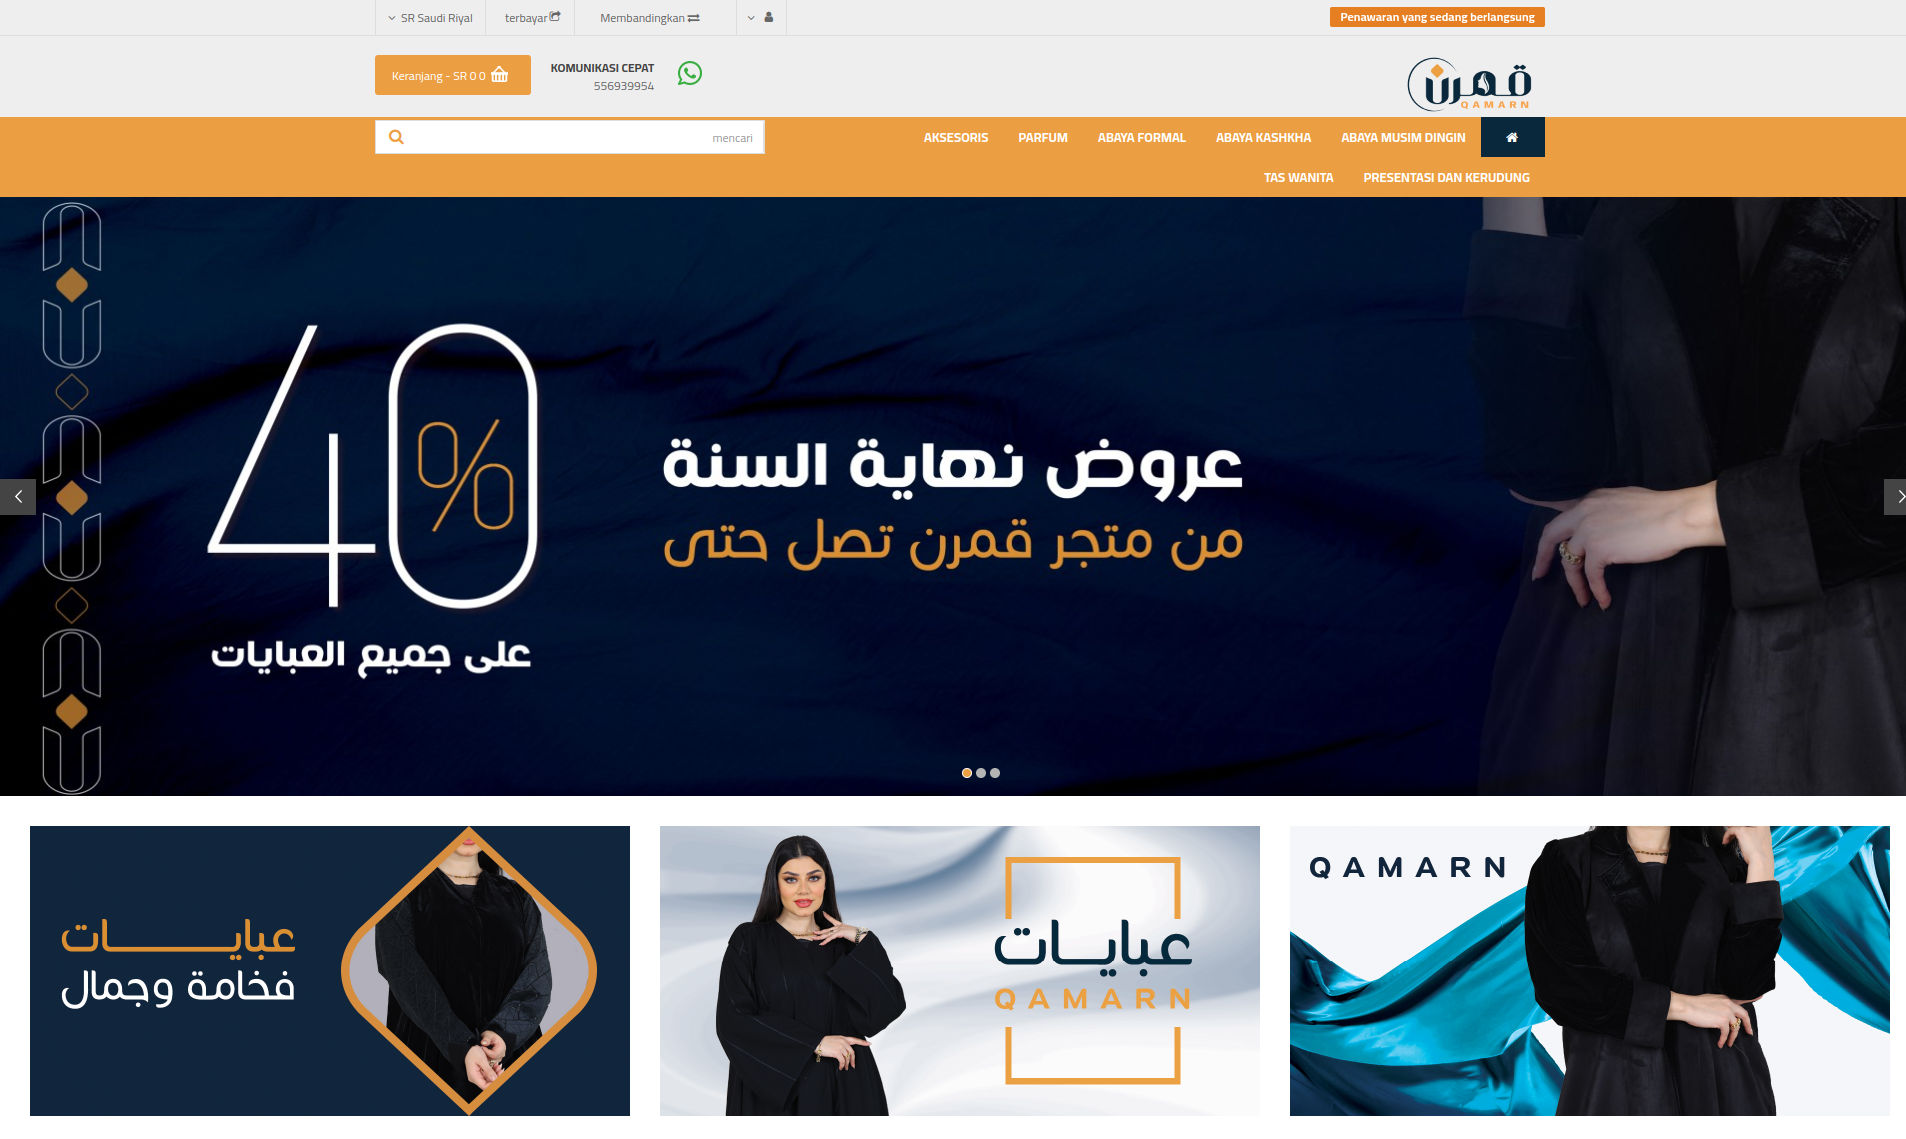 Qamarn.com products collection of abayas, handbags, perfumes, and elegant women's accessories opencart online store